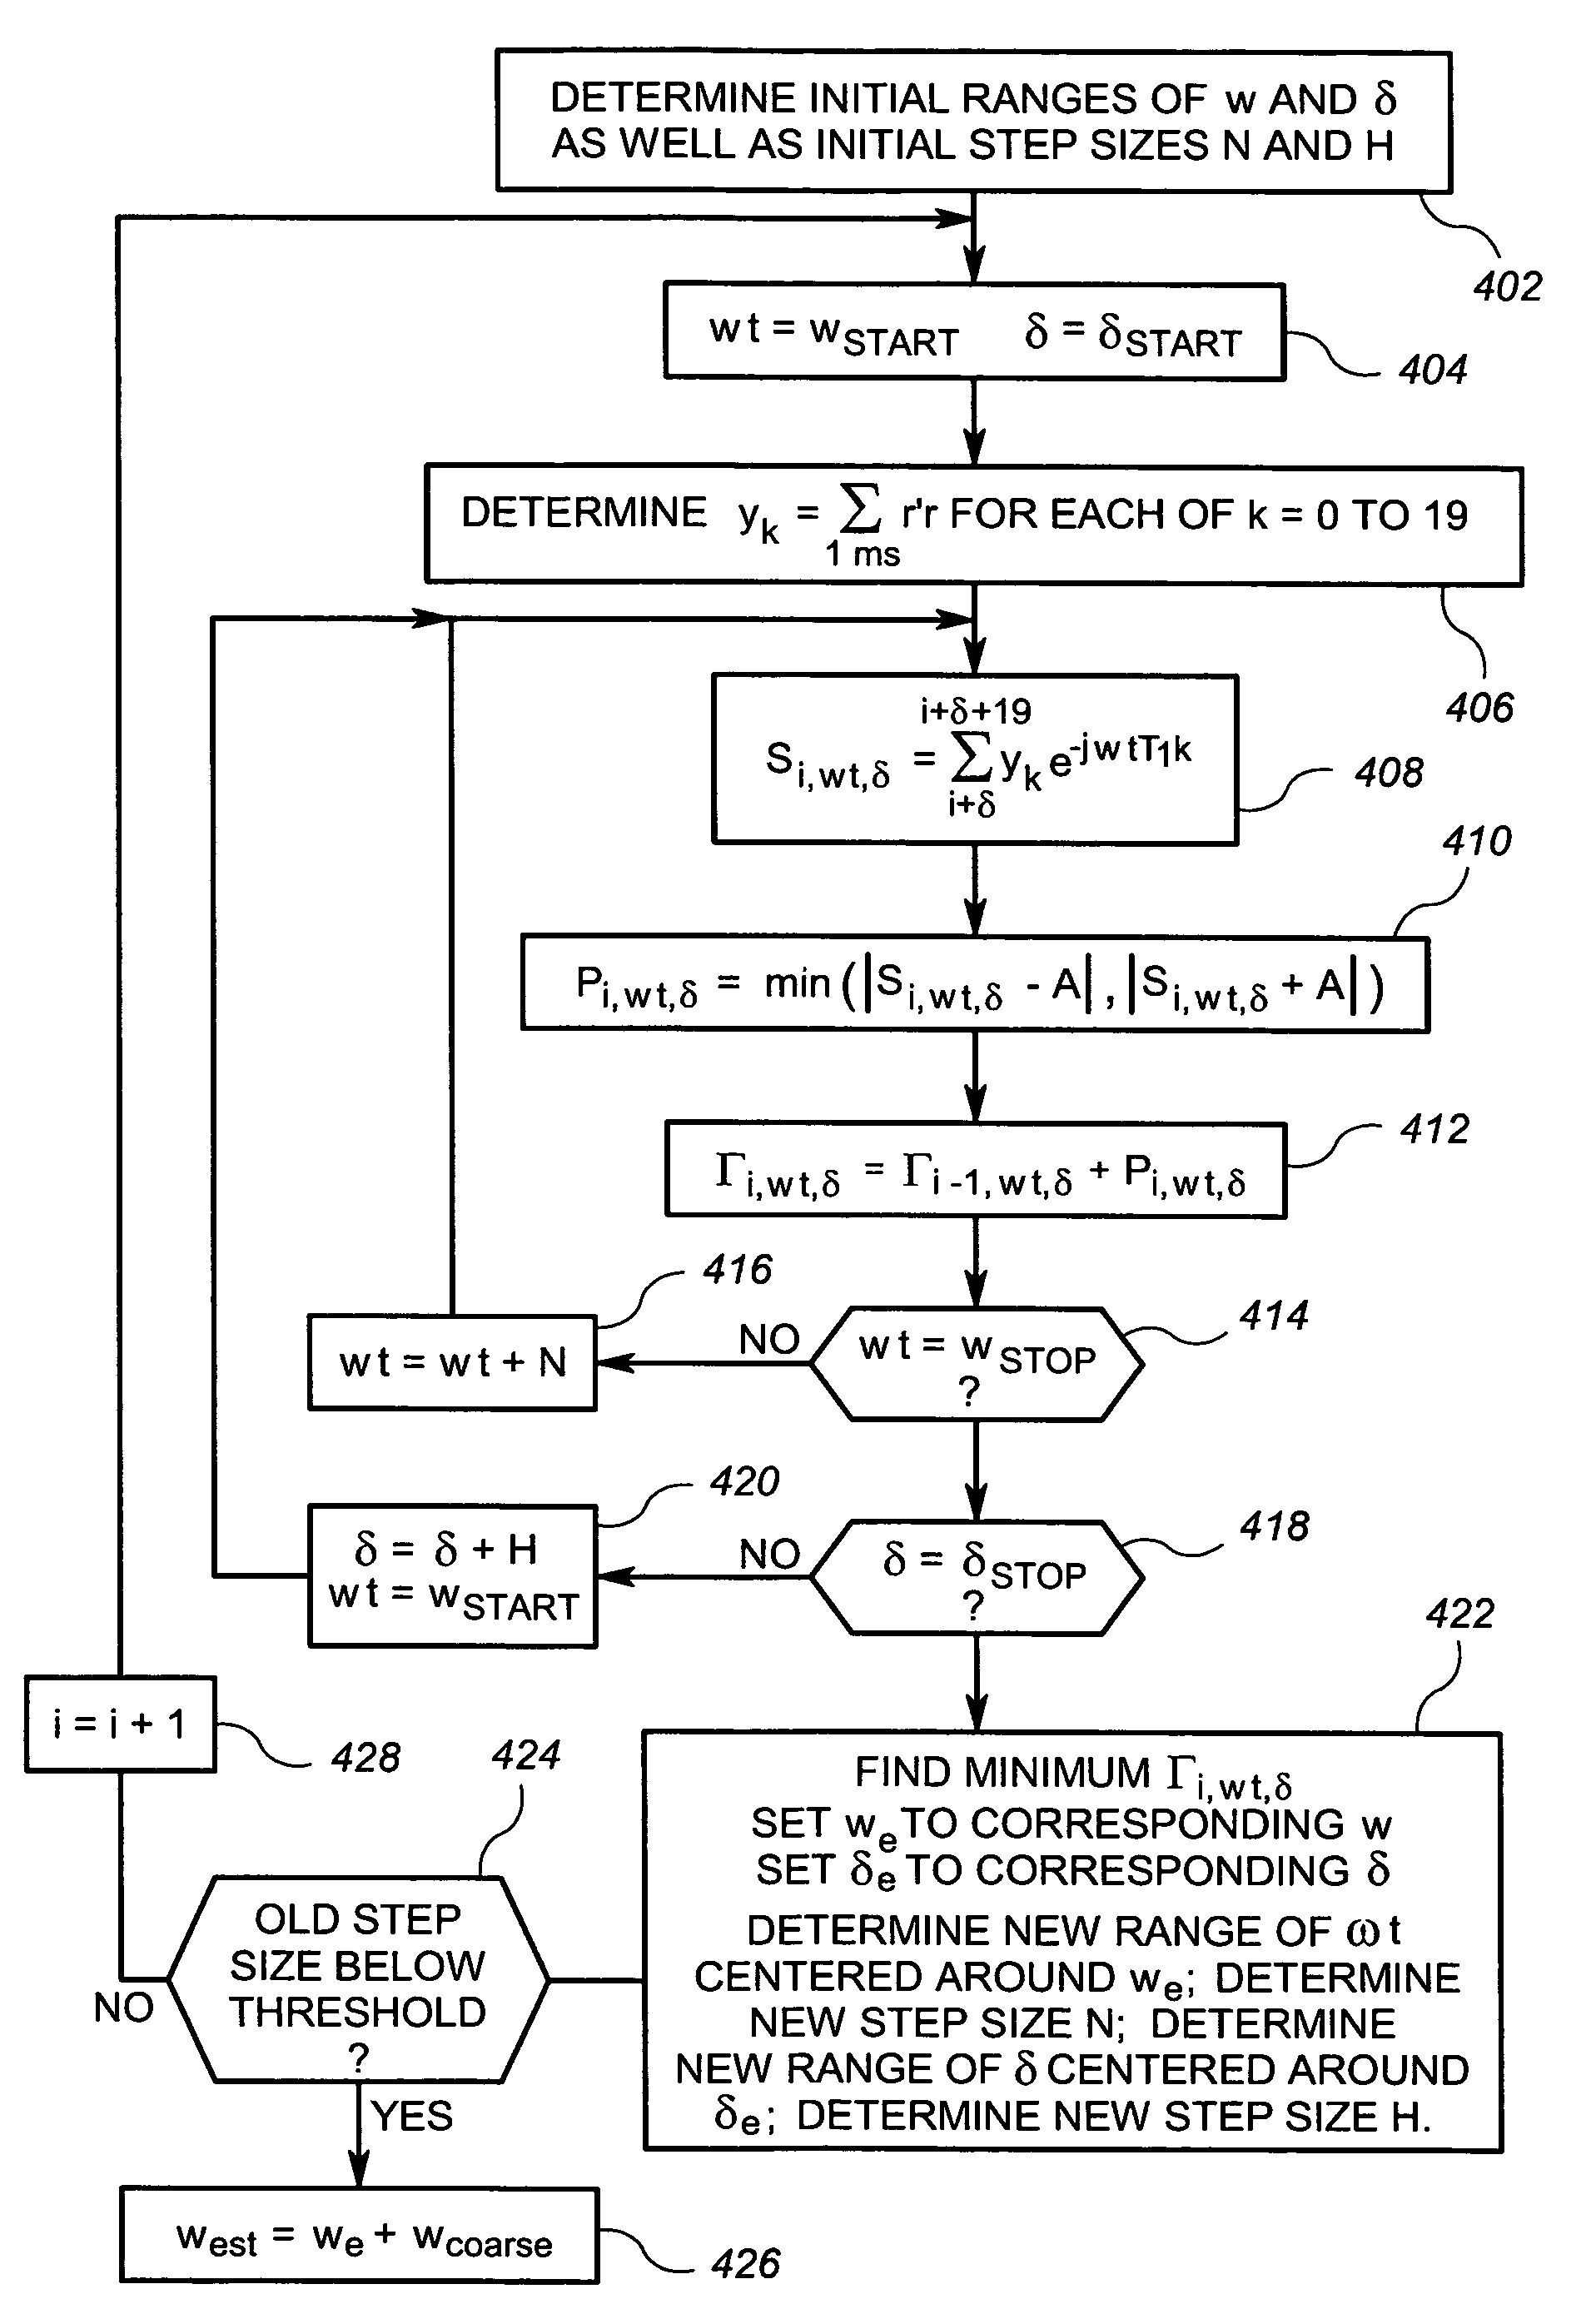 Method and apparatus for detecting and processing global positioning system (GPS) signals